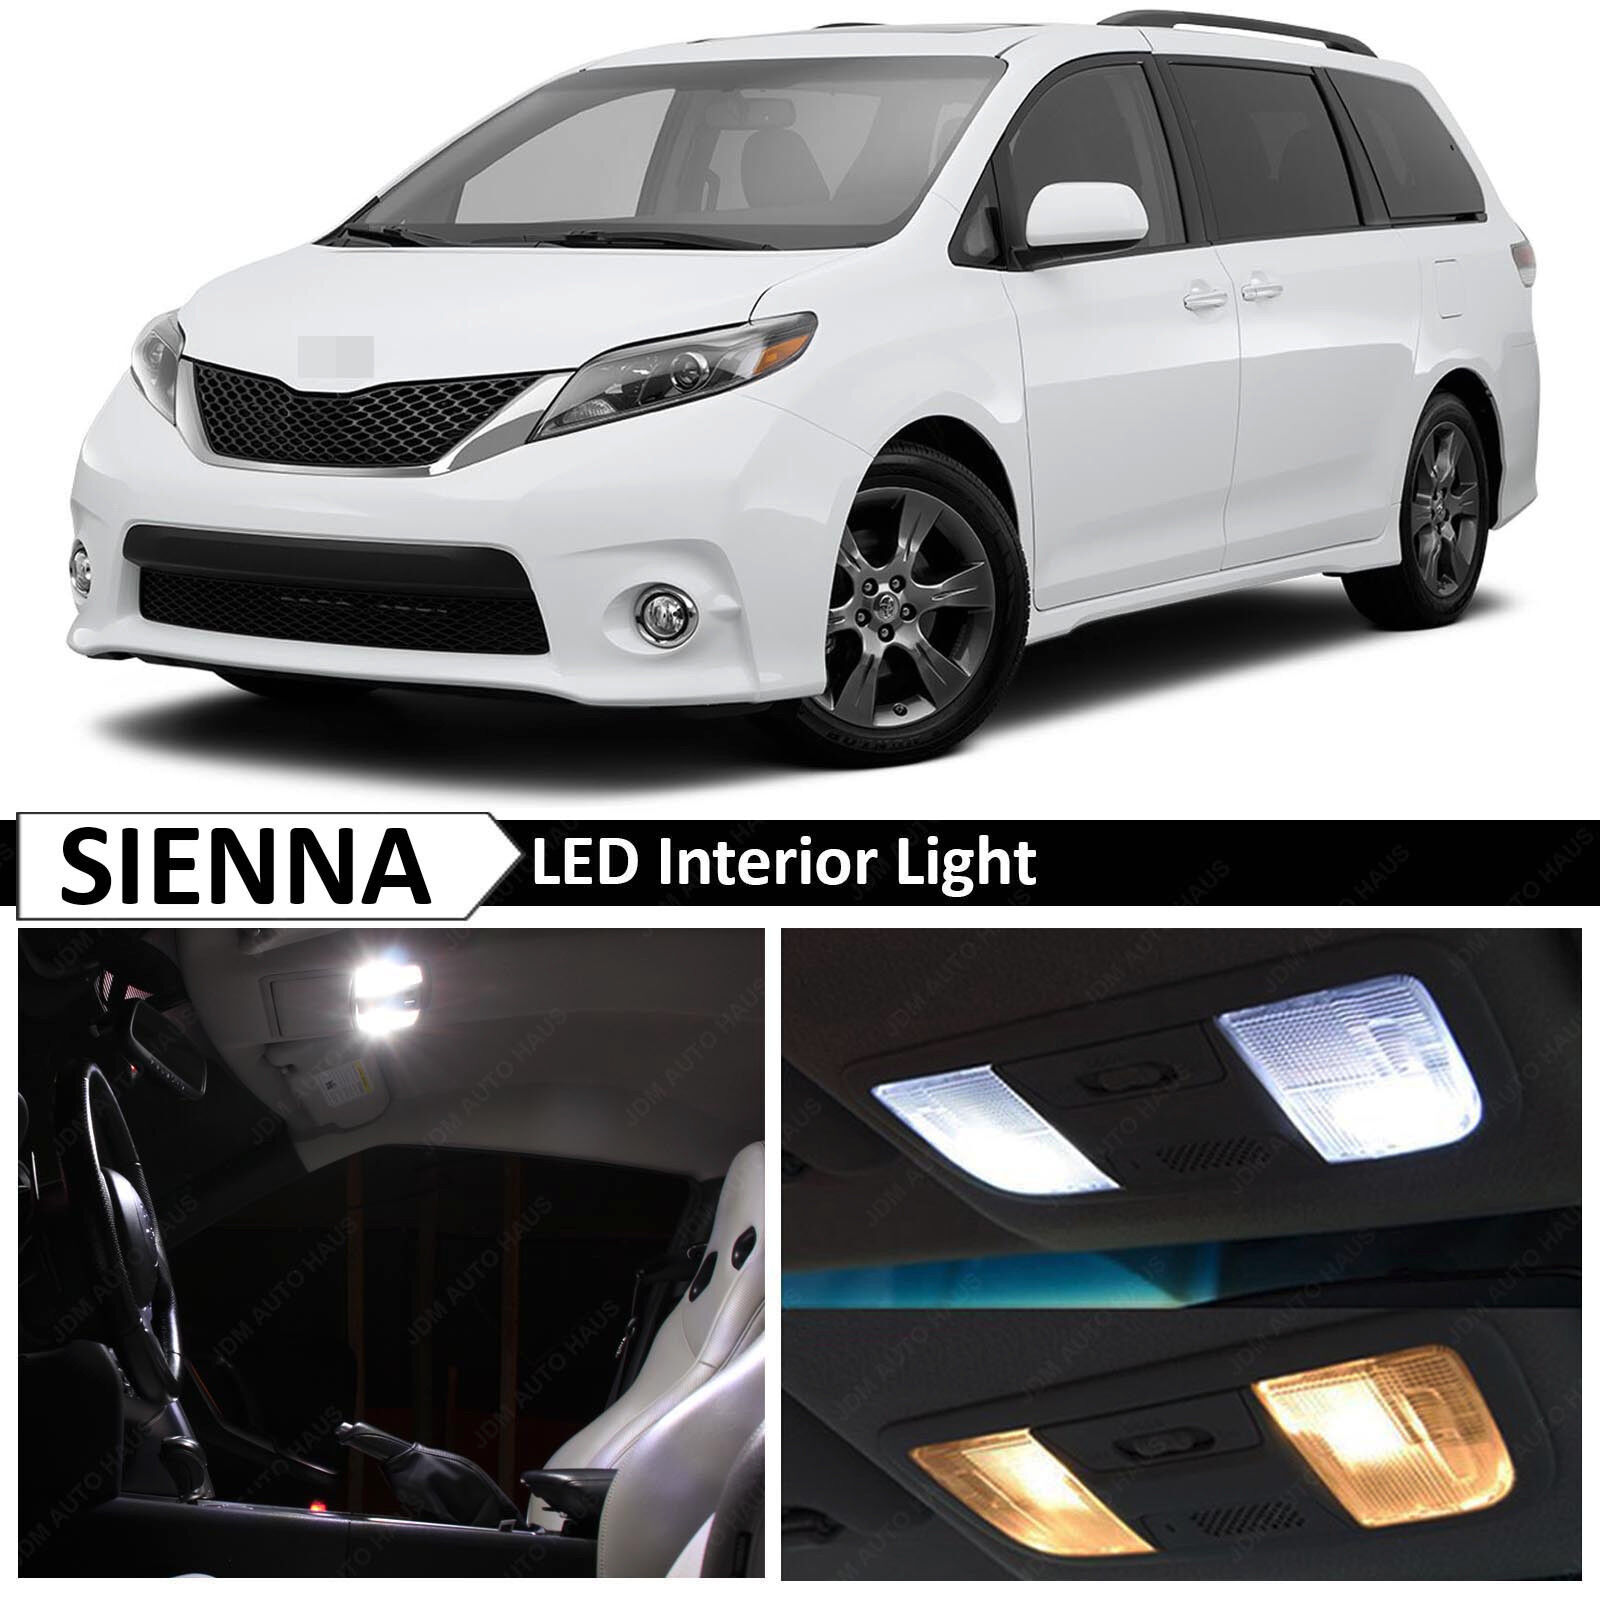 21x White Interior Map Dome LED Lights Bulb Package Fits Toyota Sienna 2015-2017